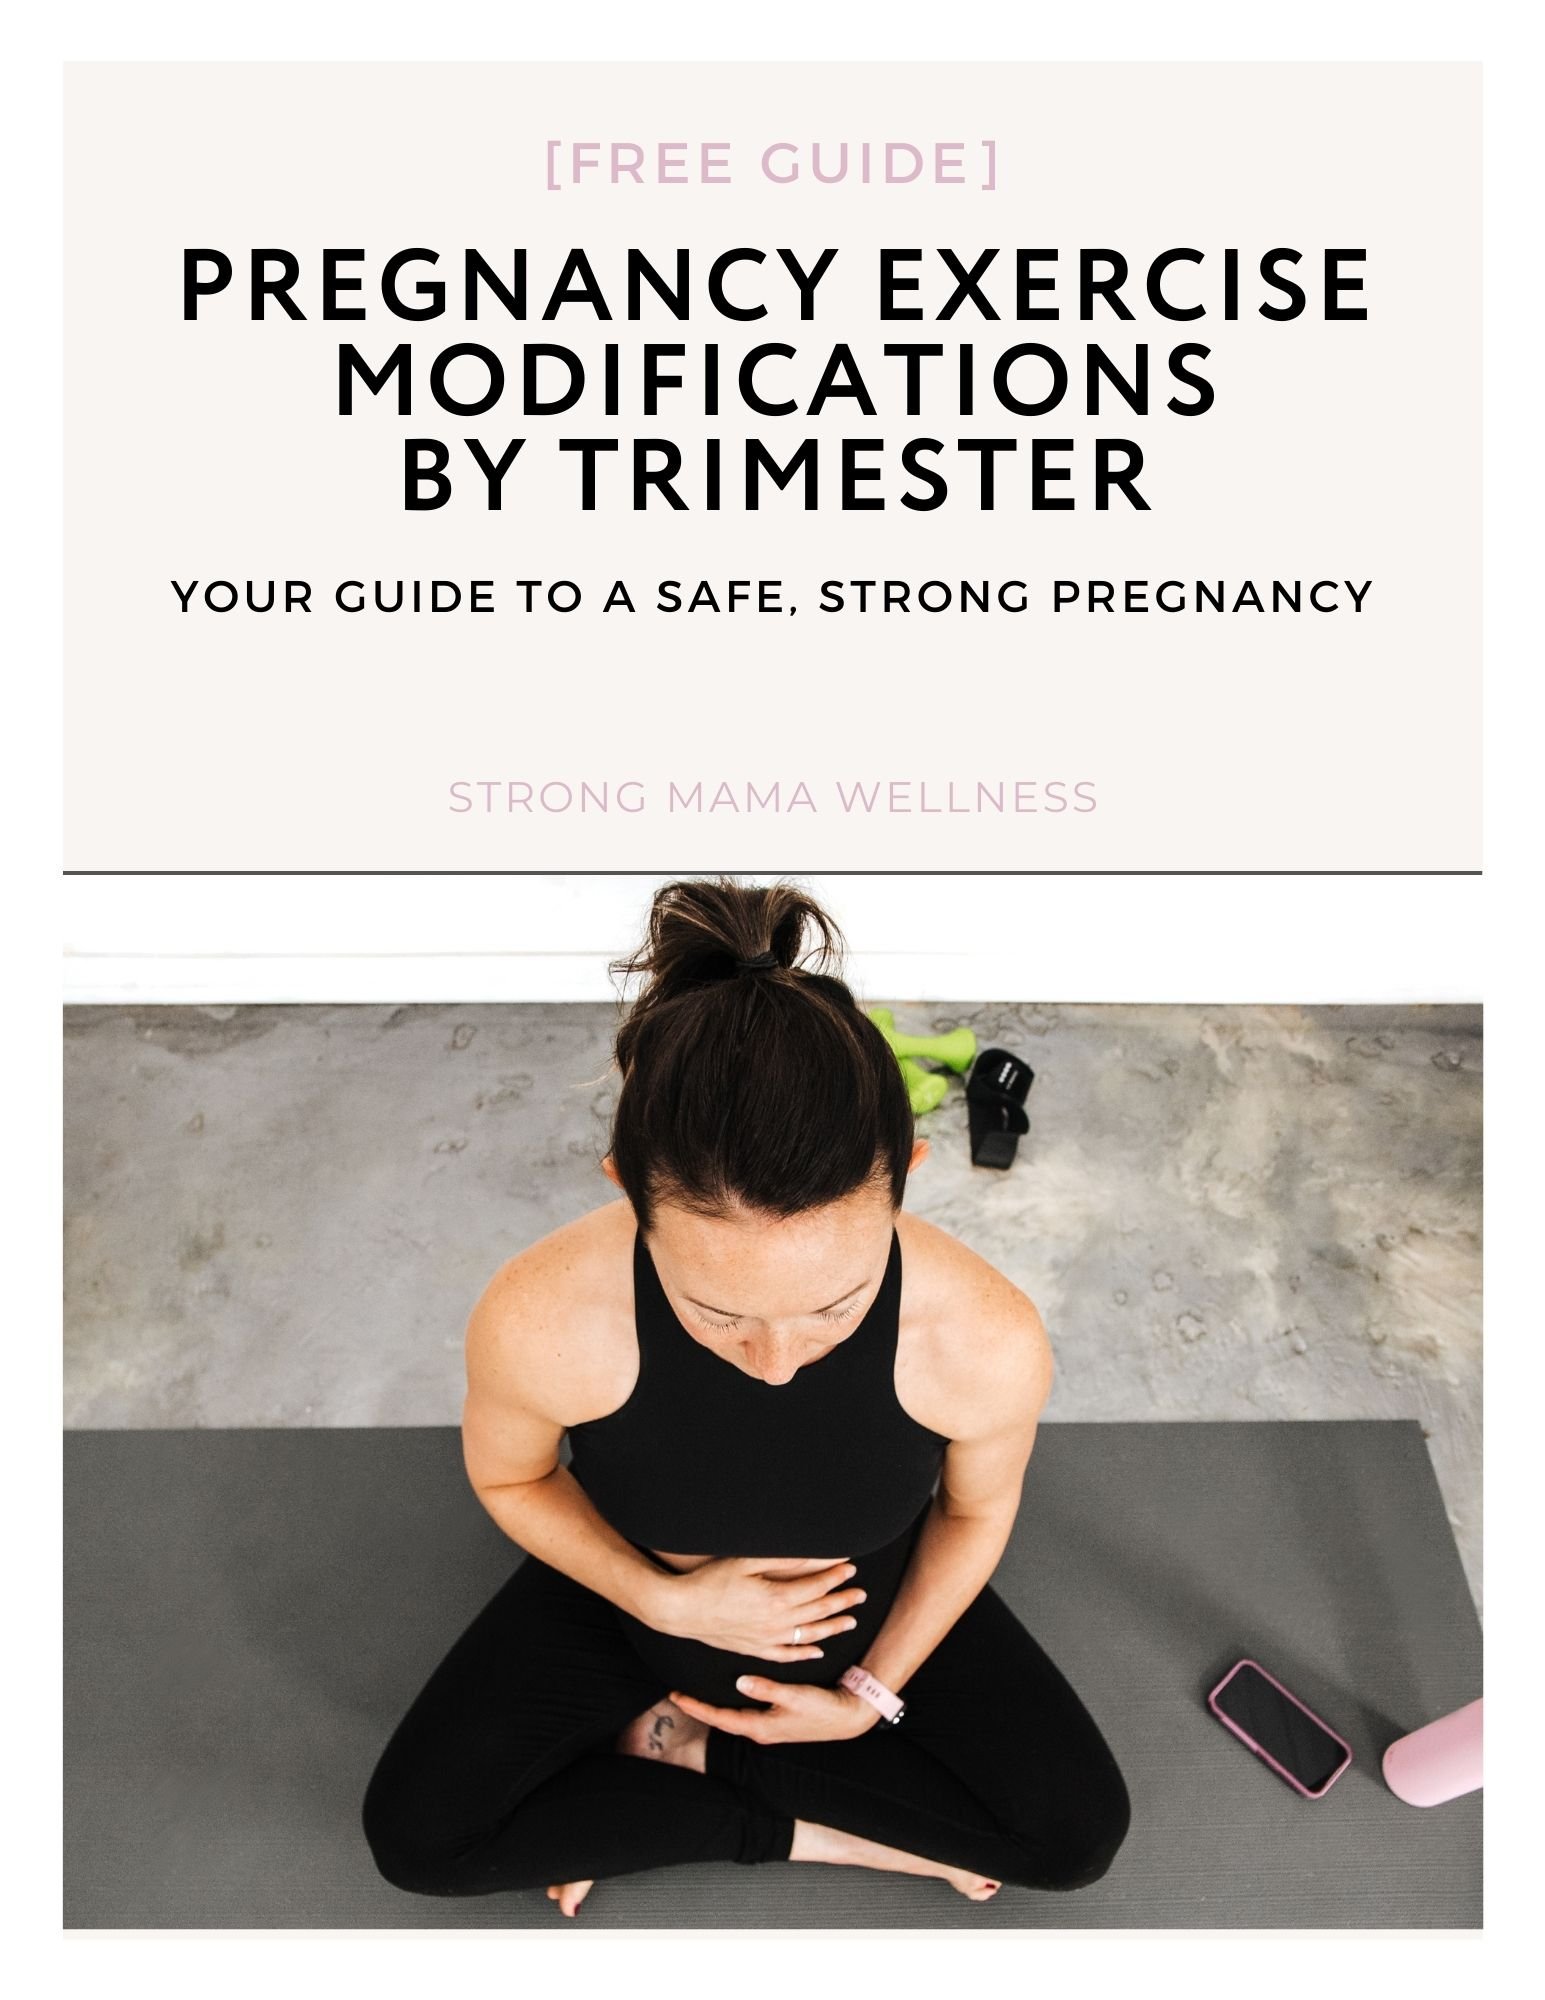 Exercise During Pregnancy: What Exercise is Safe and What to Avoid